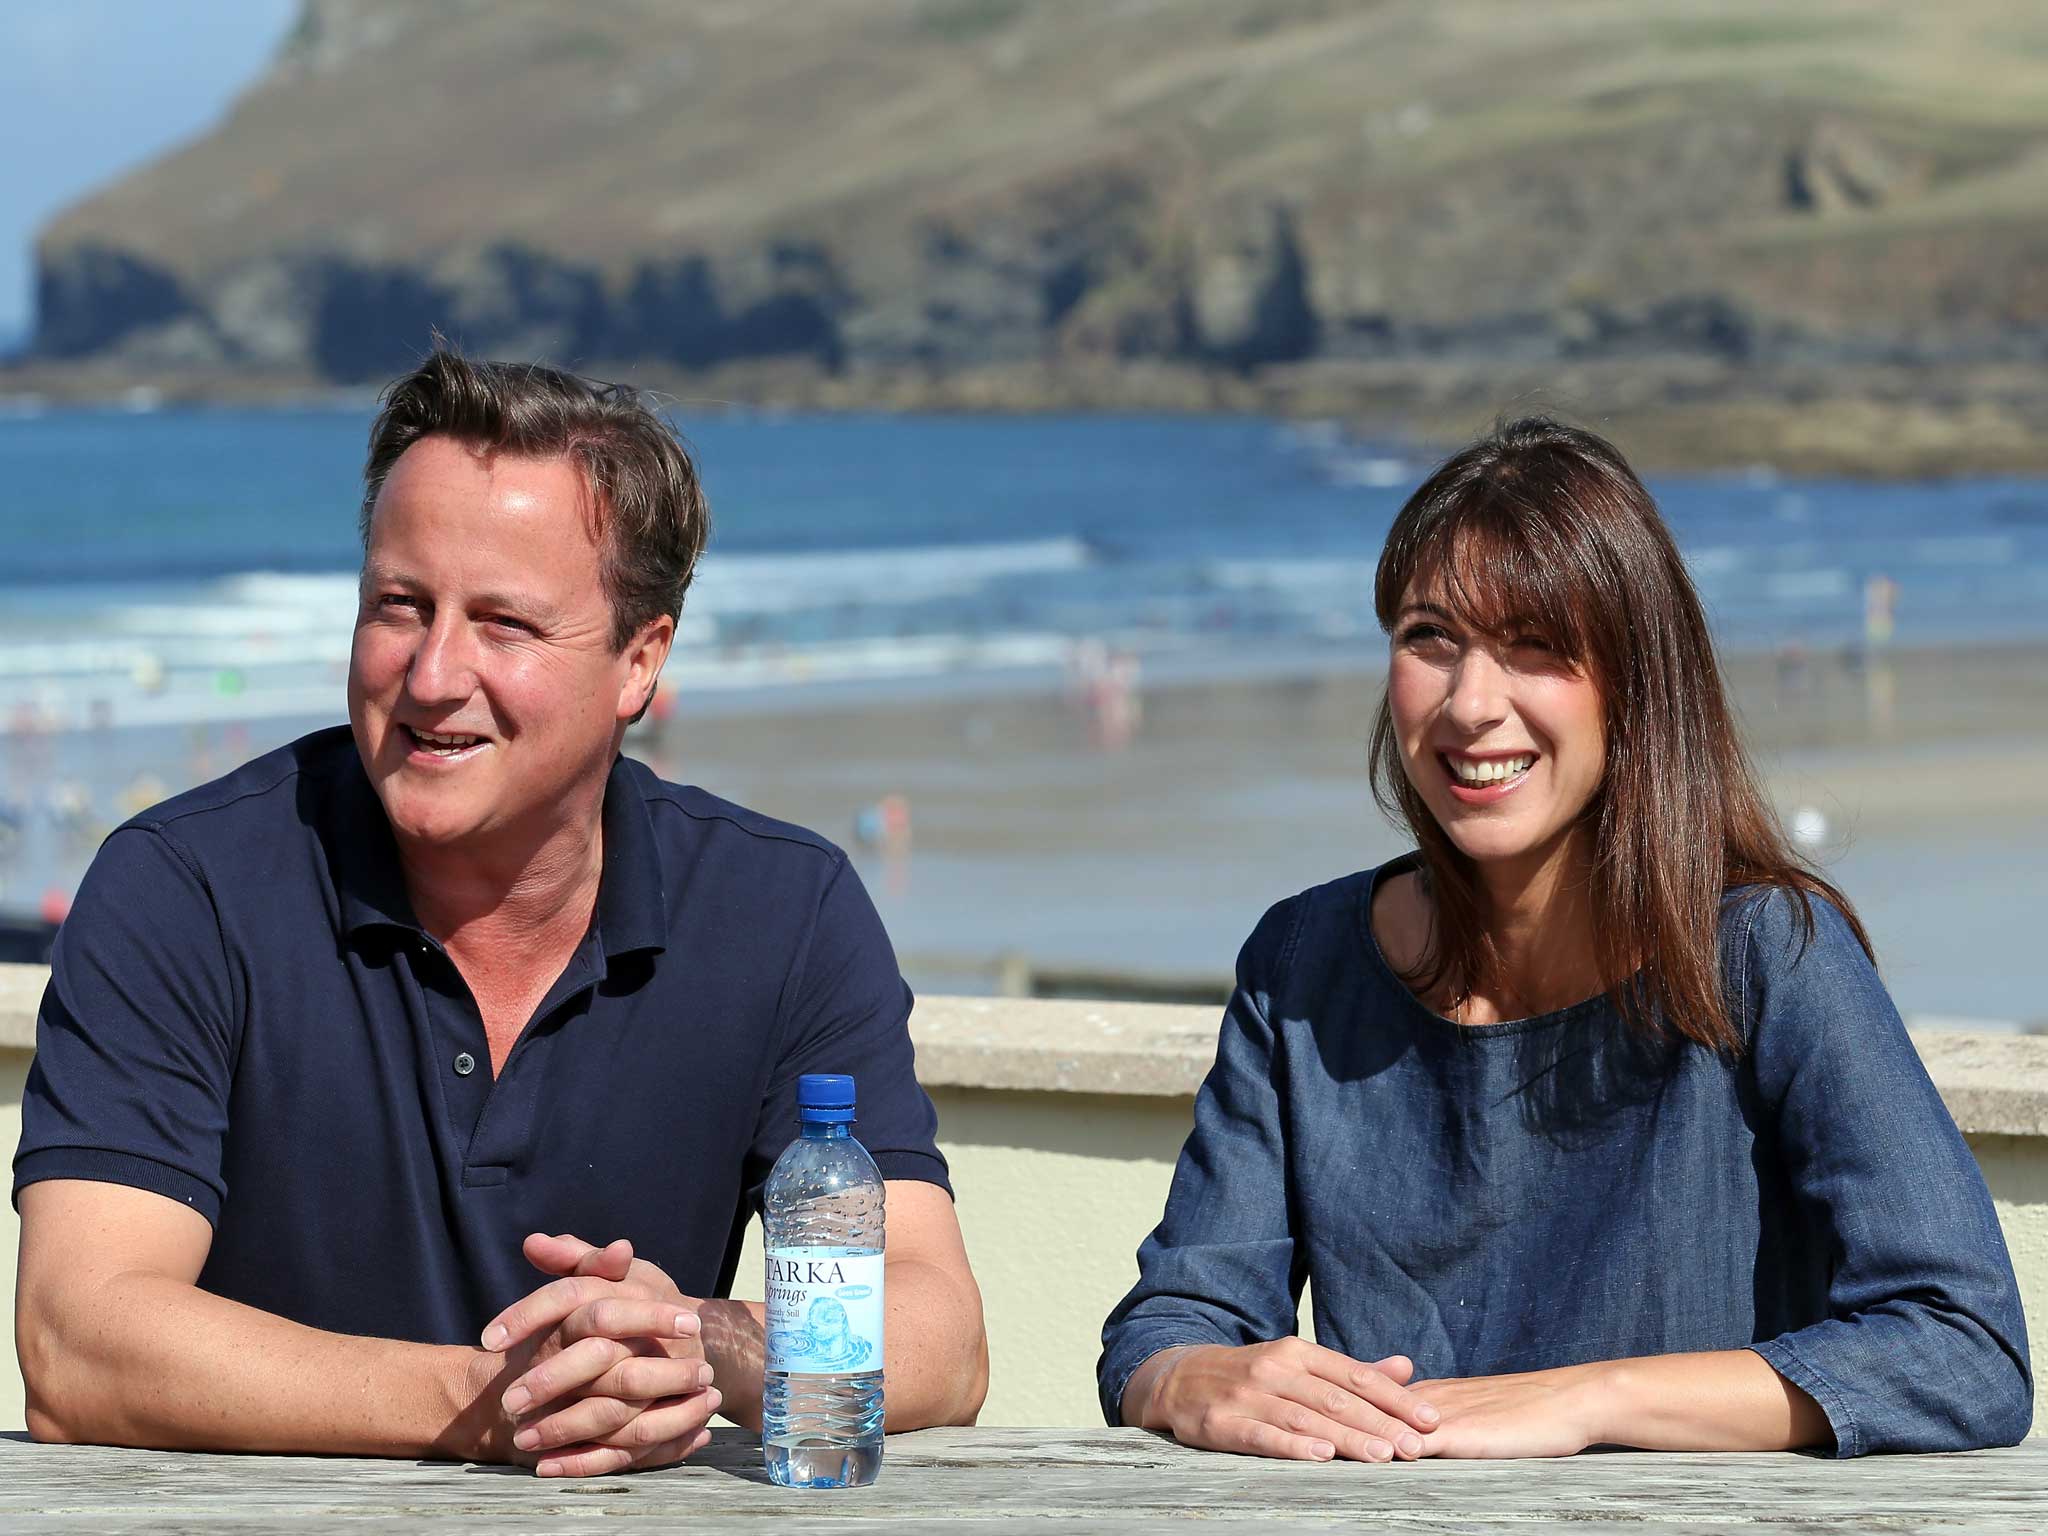 David Cameron and his wife Samantha sit on a bench outside a cafe overlooking the beach at Polzeath